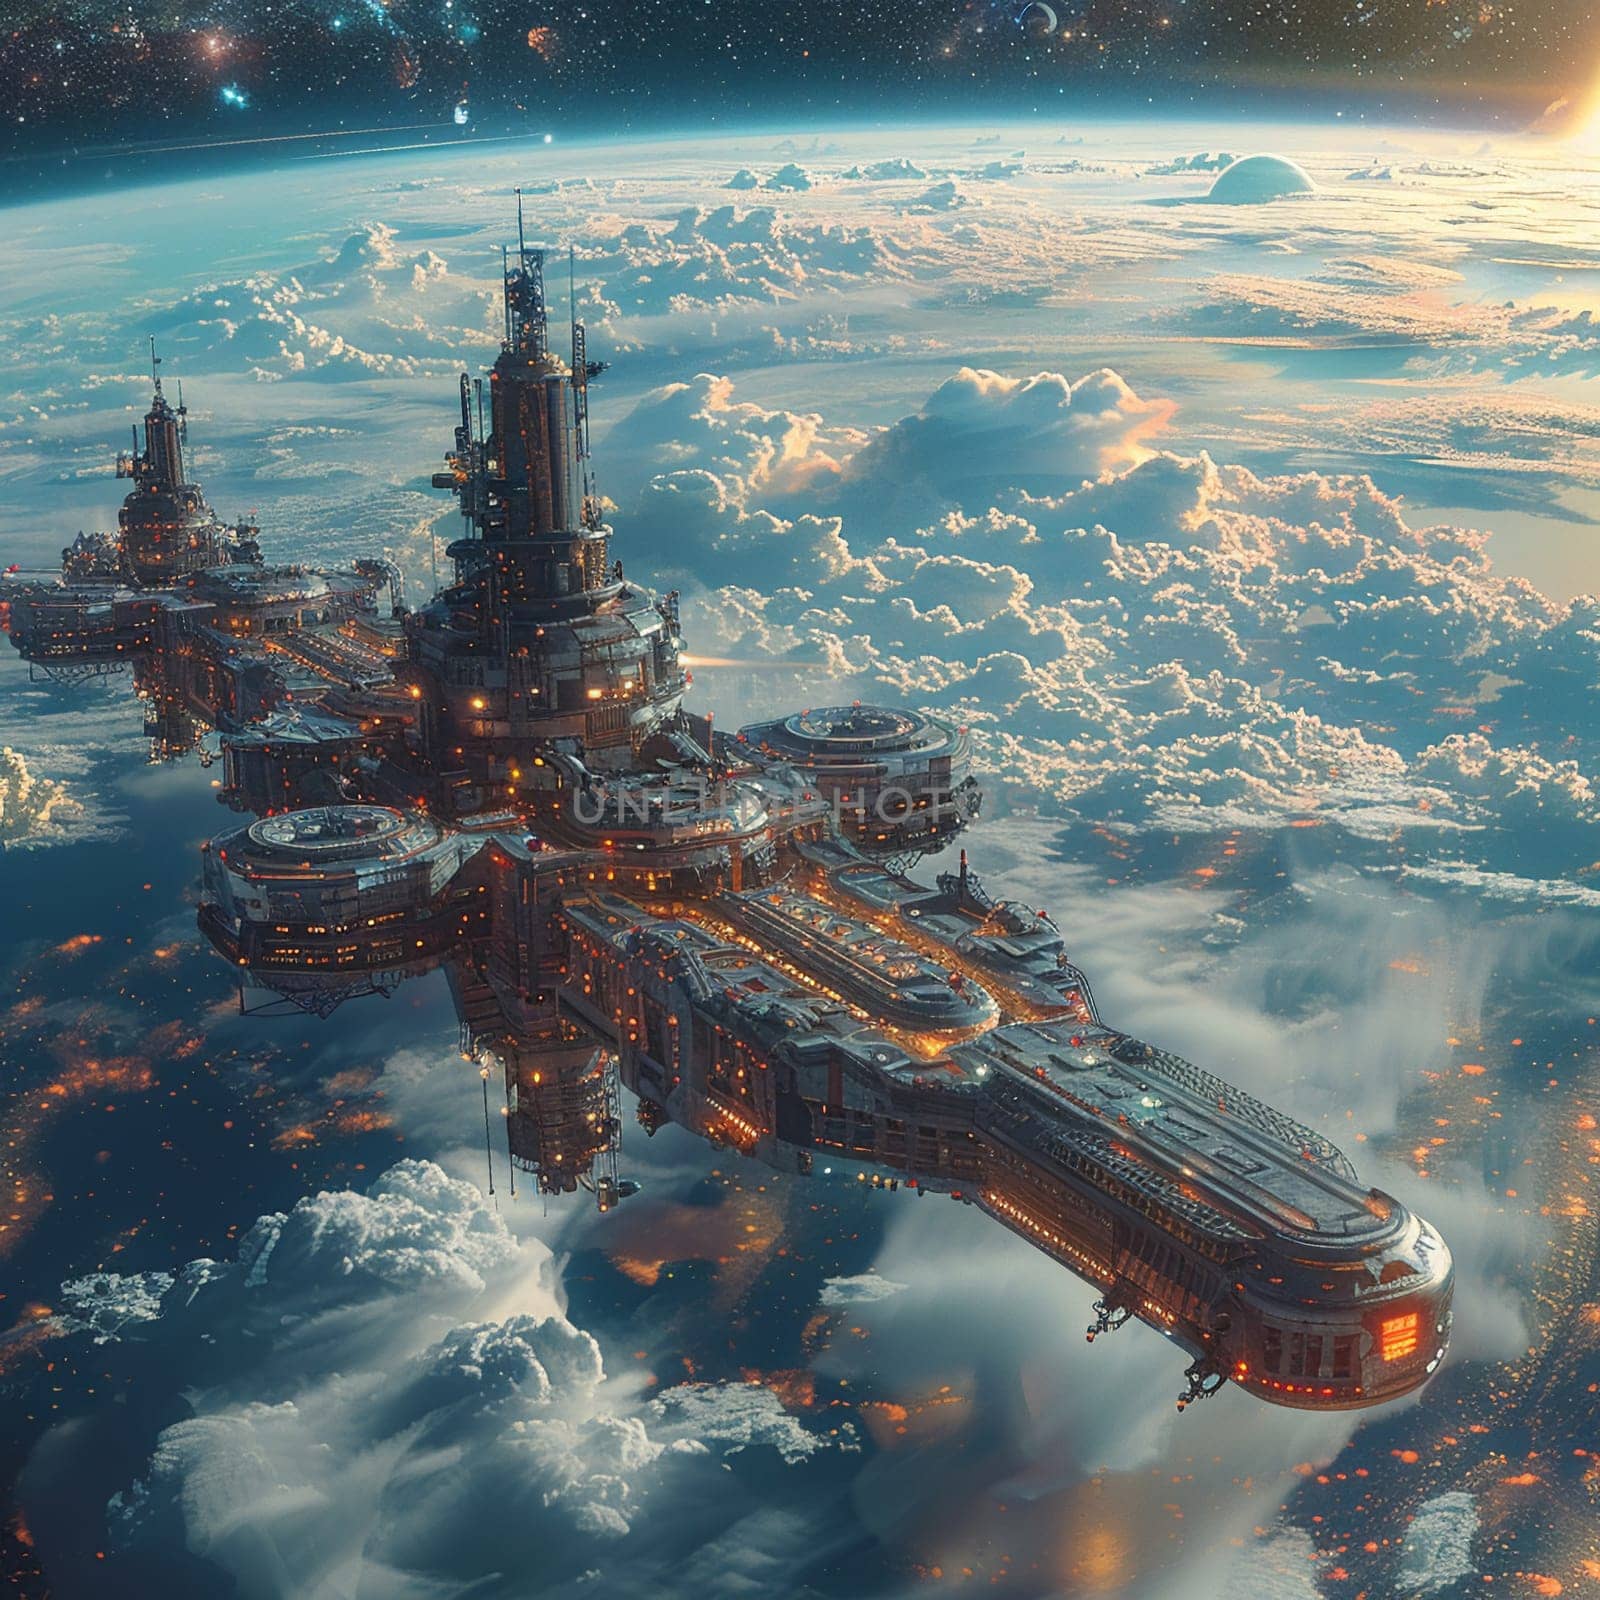 Space station orbiting a terraformed planet by Benzoix